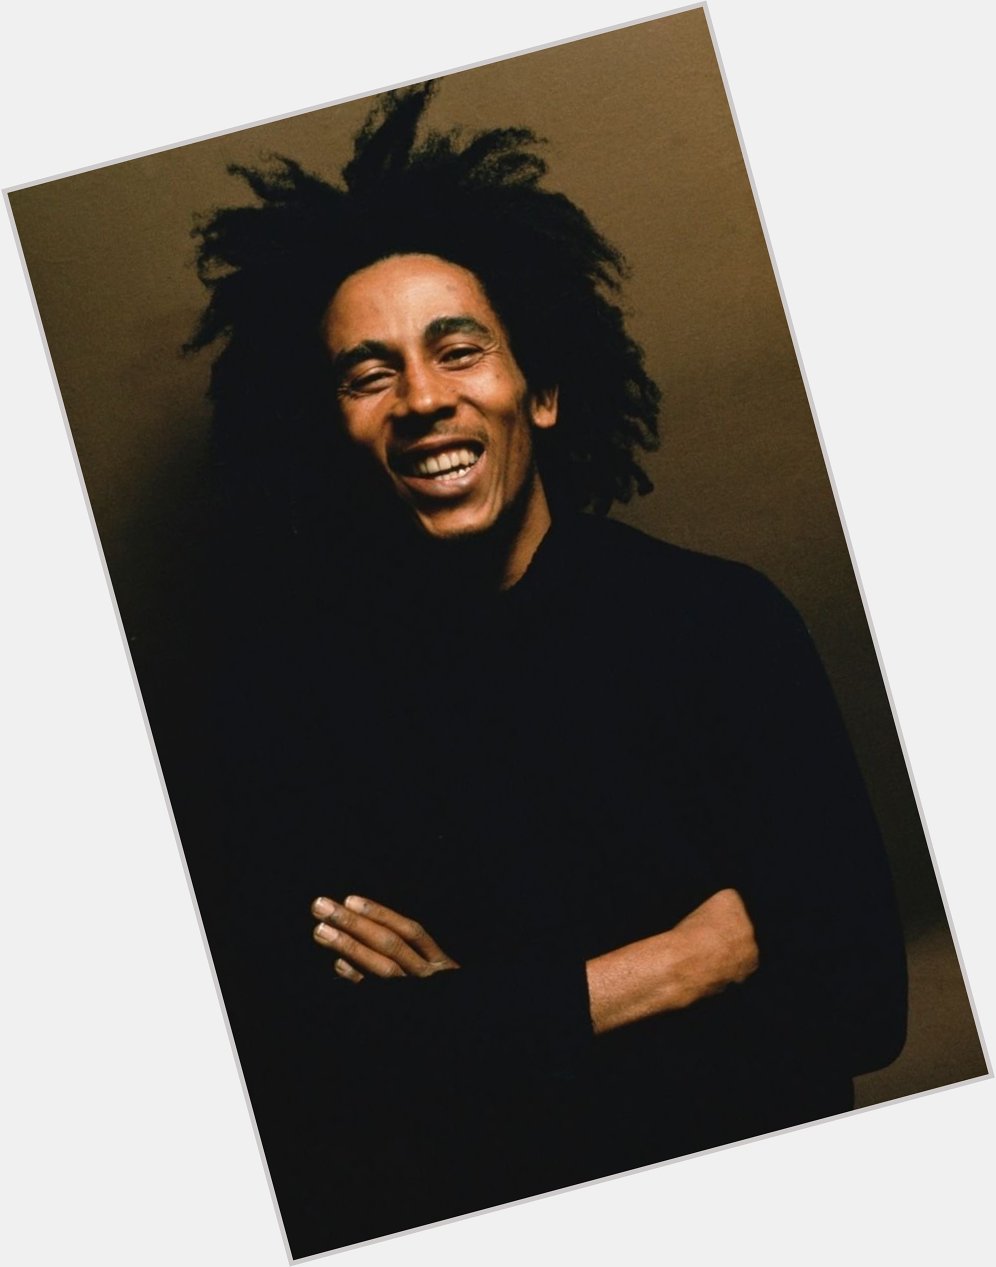 A legend lives on! 

Happy blessed birthday to Bob Marley. 